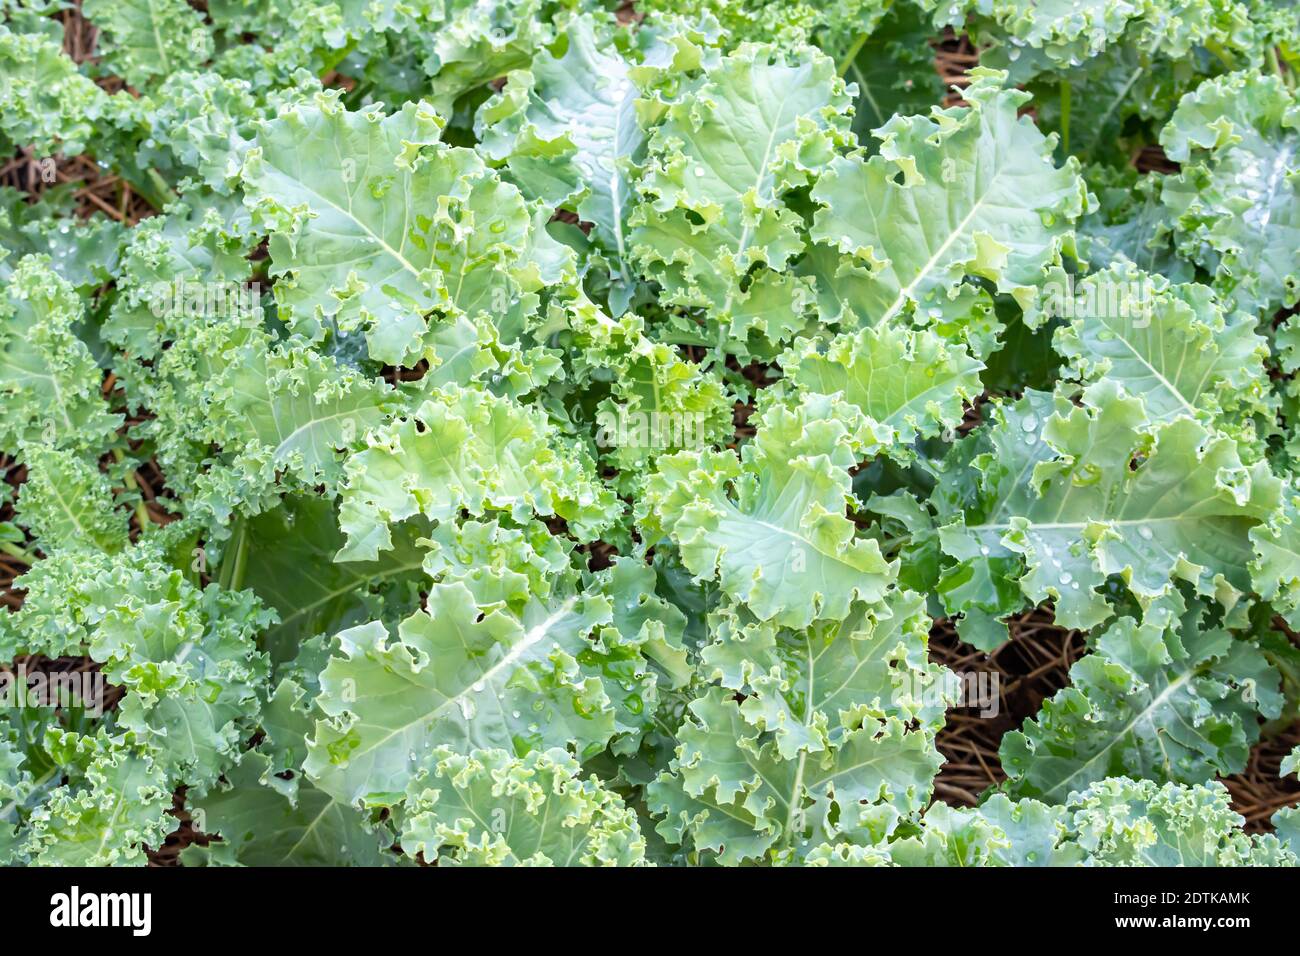 Lots of Curl leaf kale or Brassica oleracea grown in the field Covered with dry straw. Stock Photo